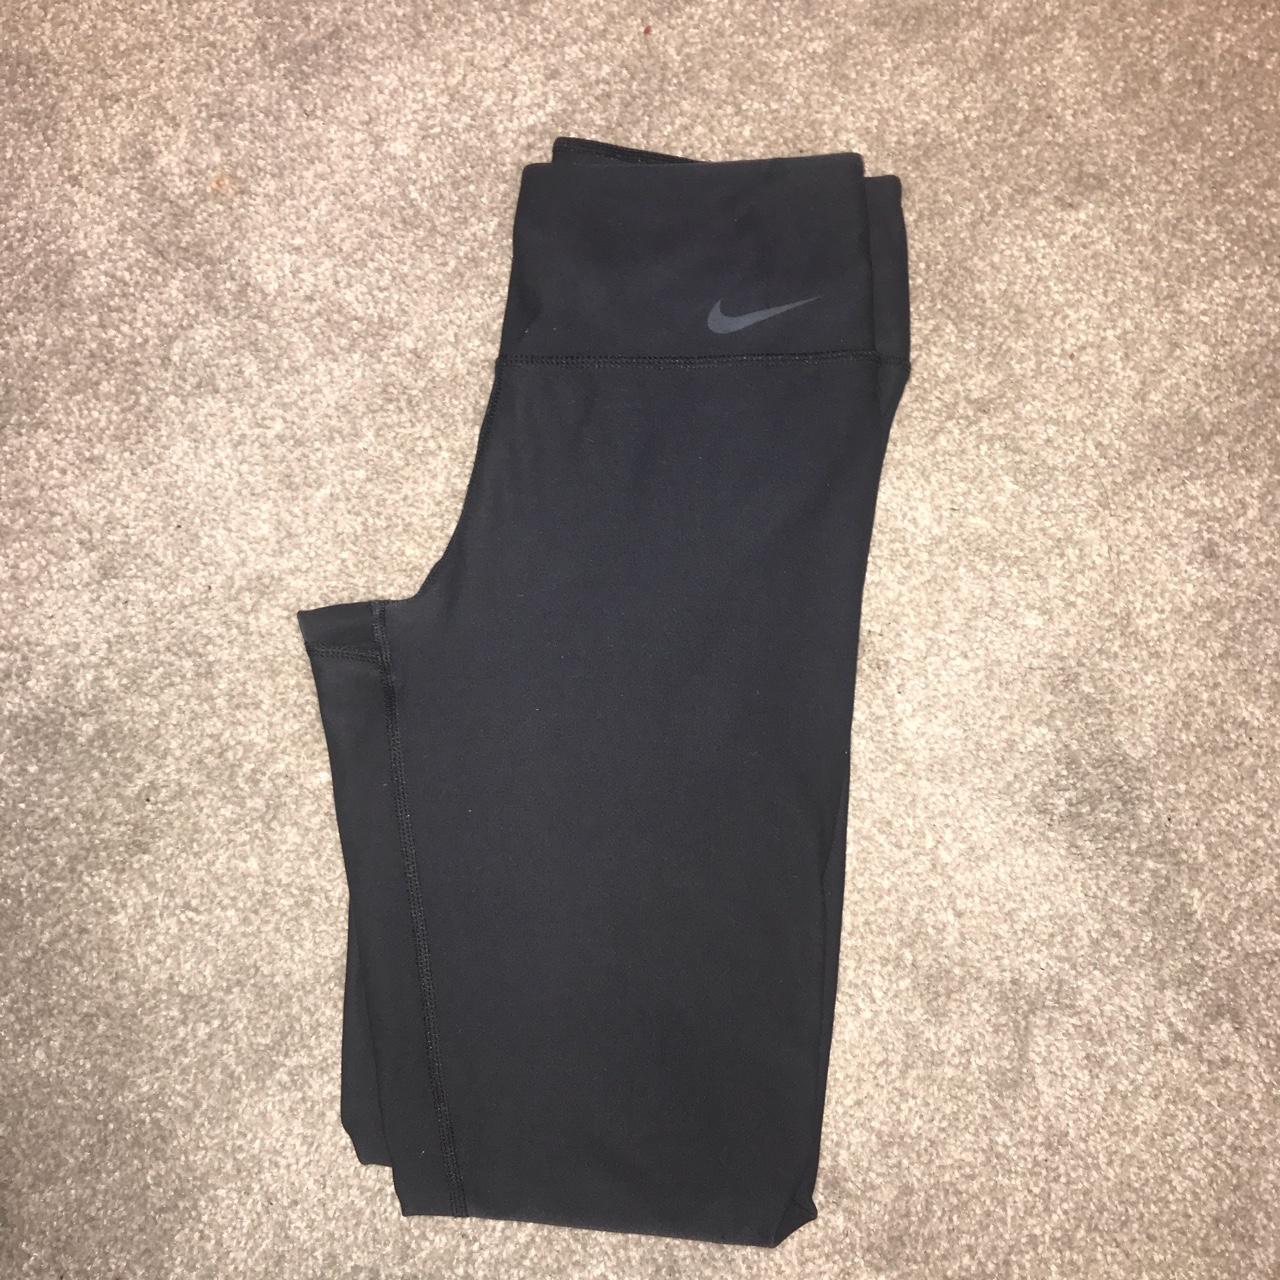 Nike dry-fit running leggings Low rise with cord - Depop